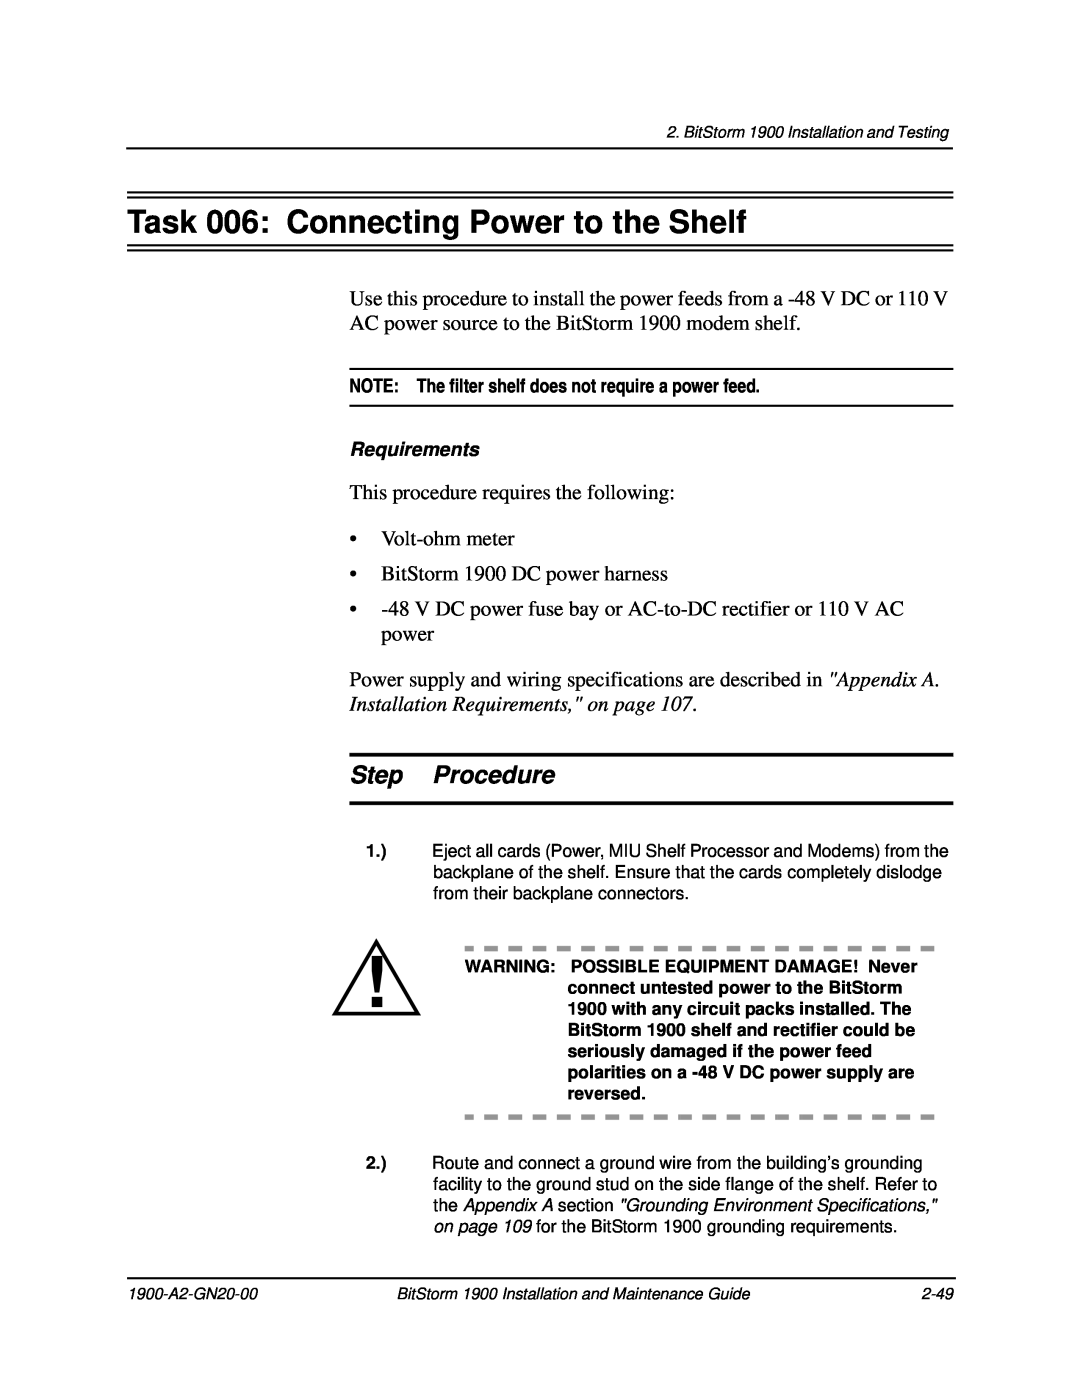 Paradyne 1900 manual Task 006 Connecting Power to the Shelf, Installation Requirements, on page, Step Procedure 